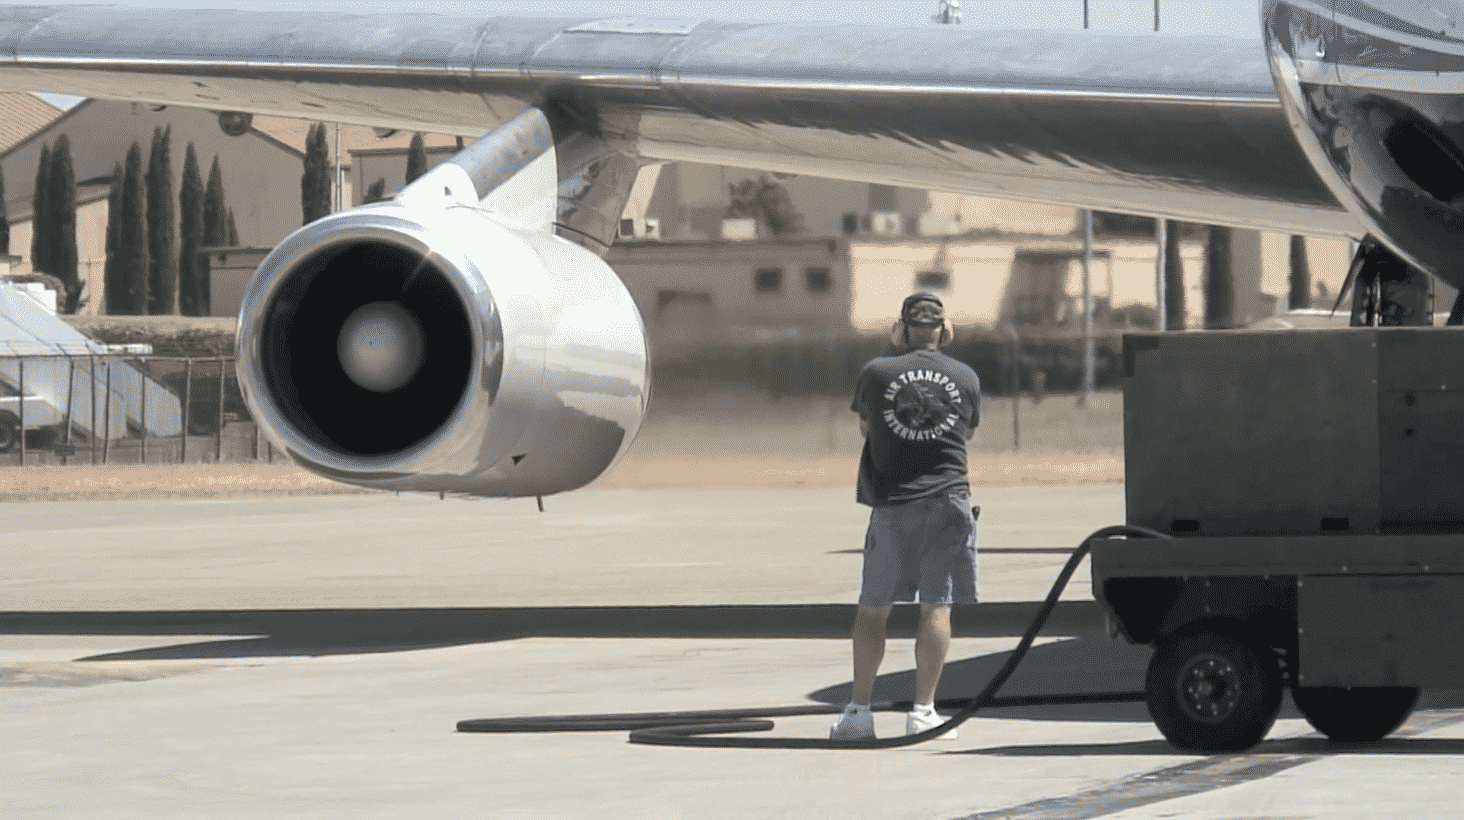 The JT3 engines are started one by one as ATI DC-8-62 N799AL prepares for he last ever departure (before the classic jetliner was retired) at Travis AFB on May 12, 2013. This is a screenshot from the 9 episode mini series "DC-8 Farewell" that streams on the JetFlix TV streaming service for aviation super fans.